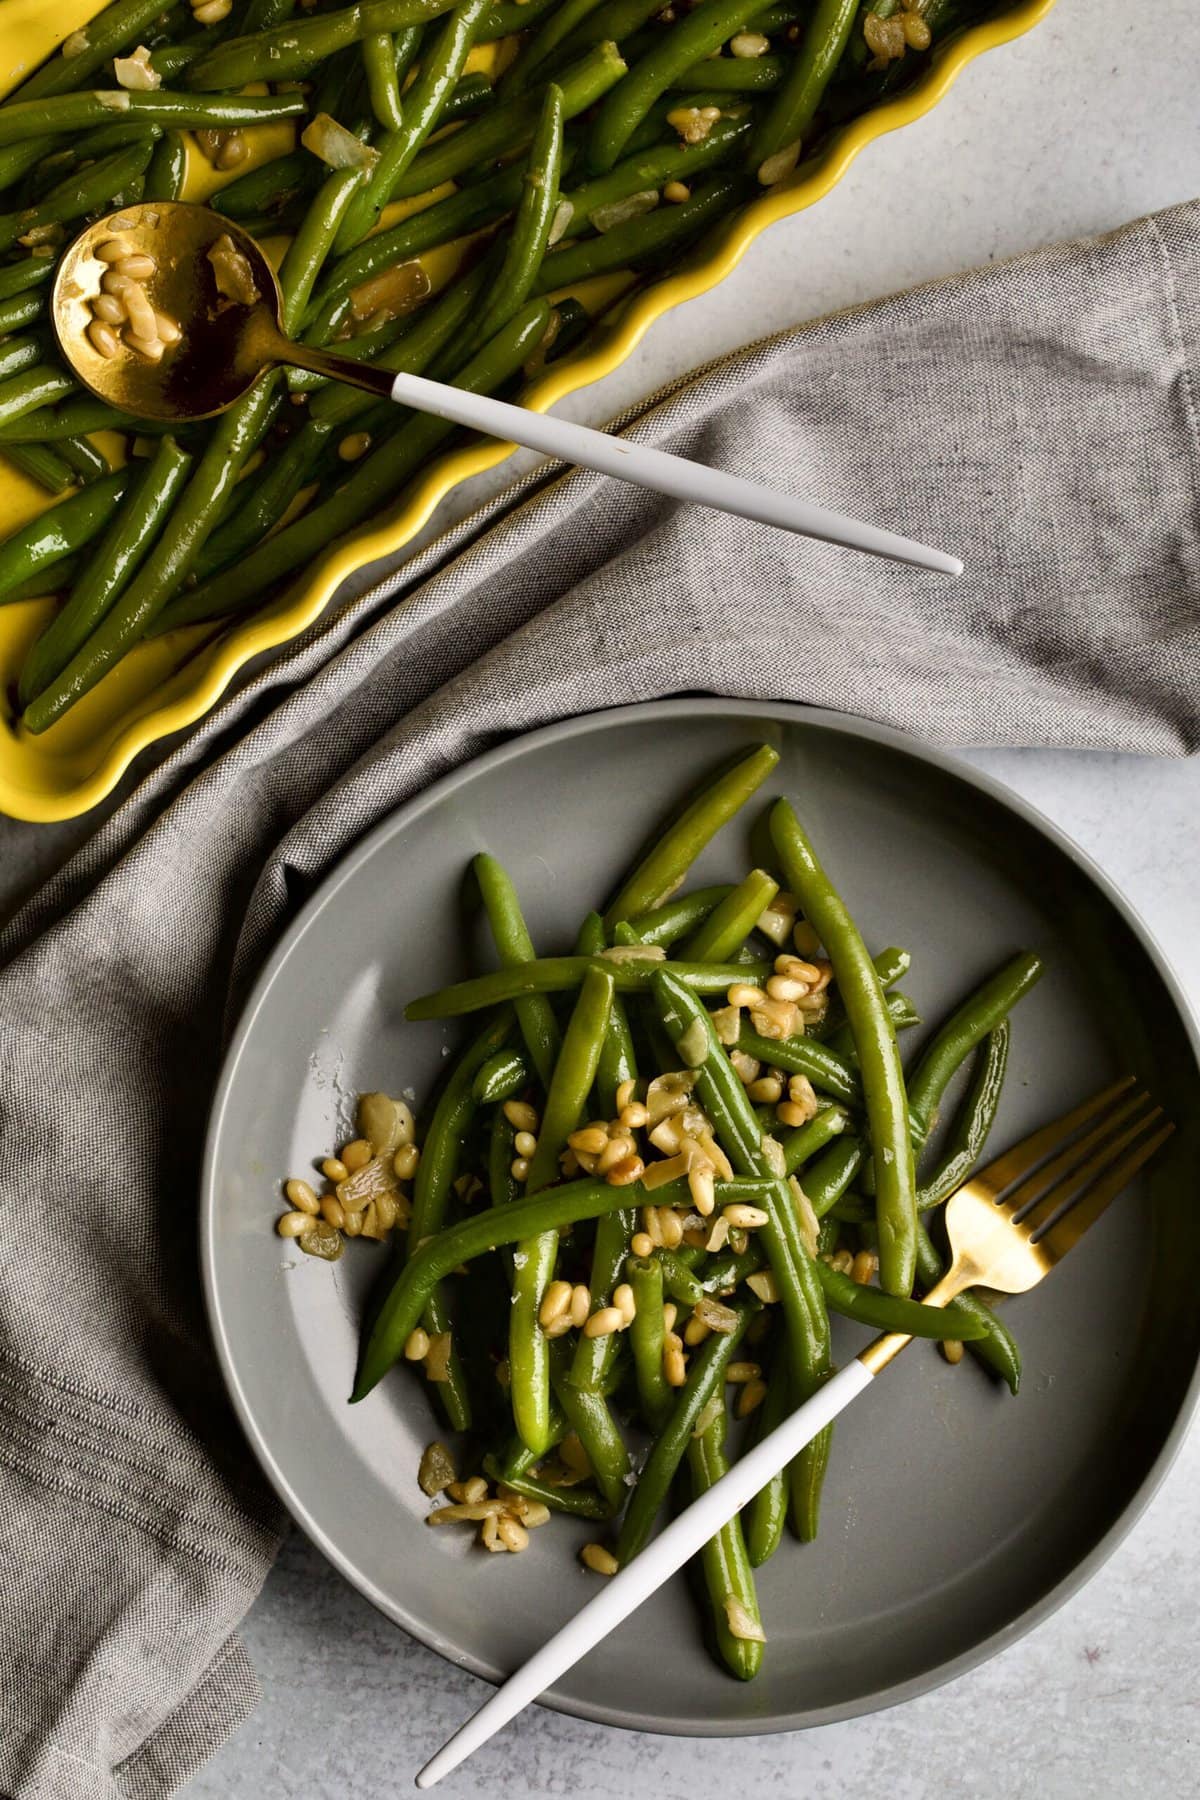 Sautéed Frozen Green Beans Recipe (Easy) on a grey plate with a fork napkin in background.